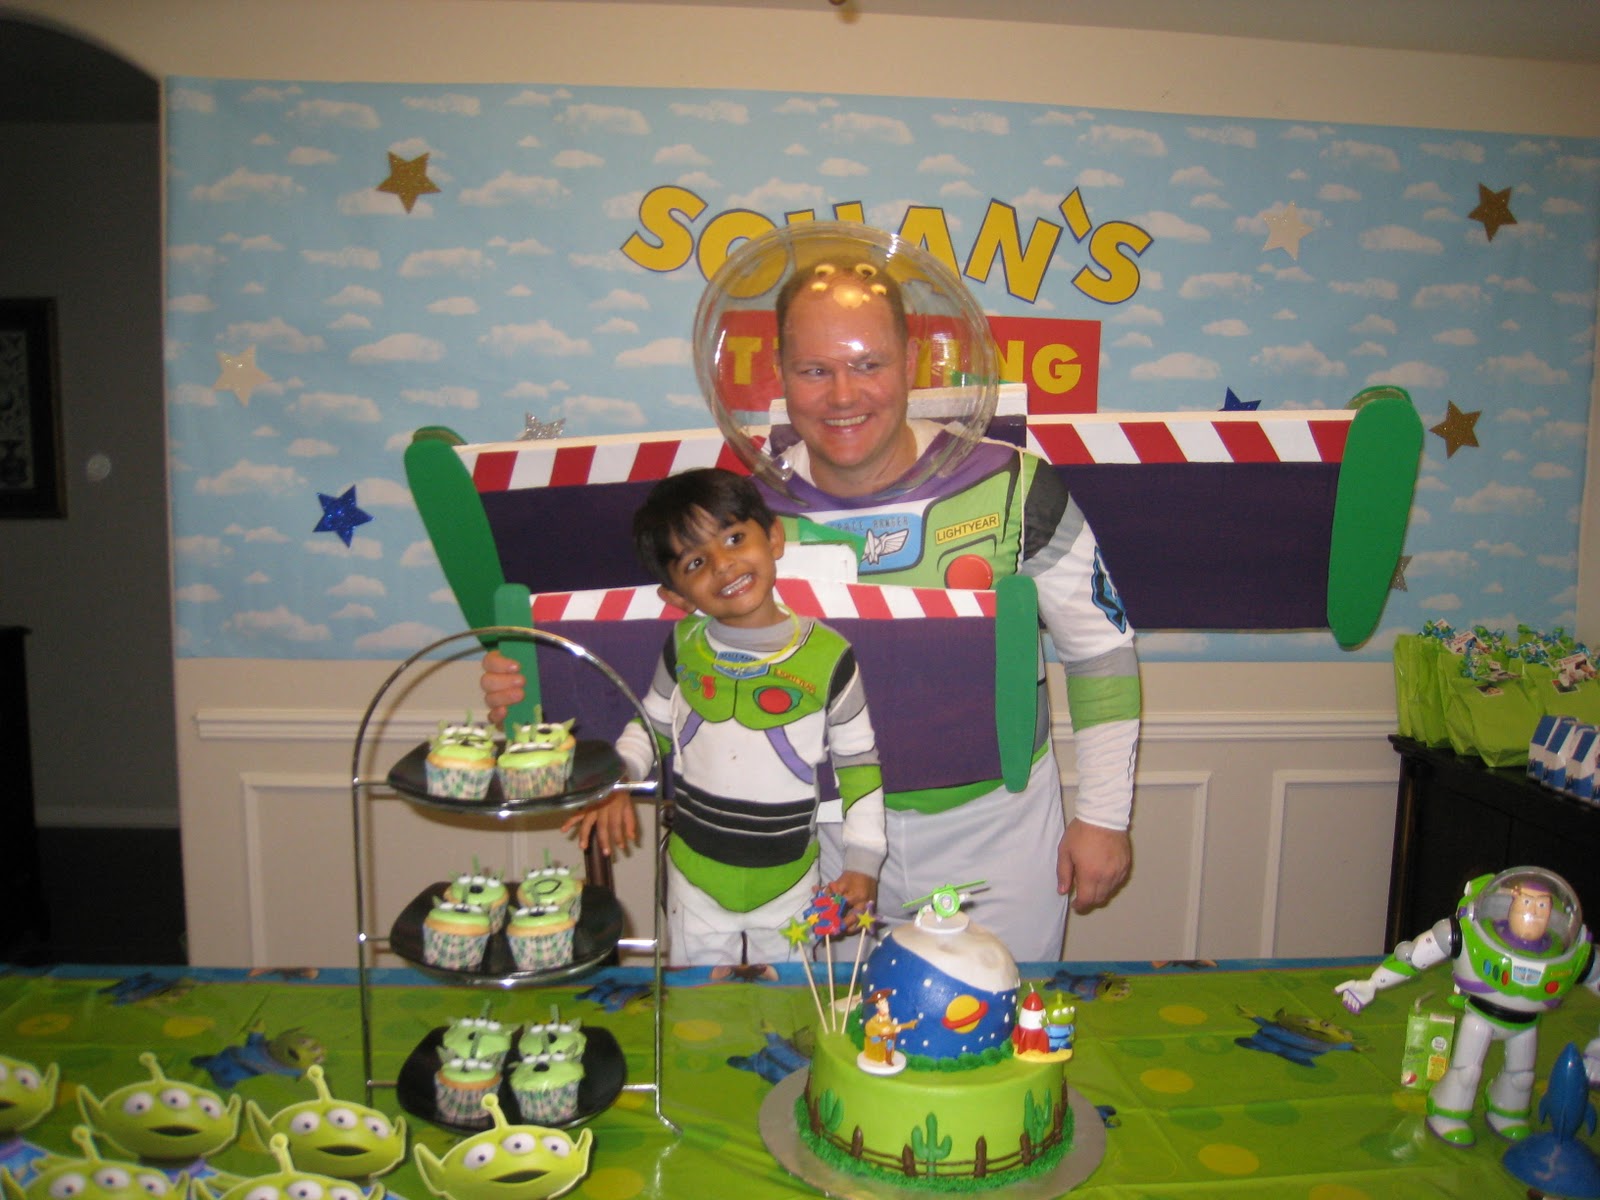 The Party Wall Toy Story Party